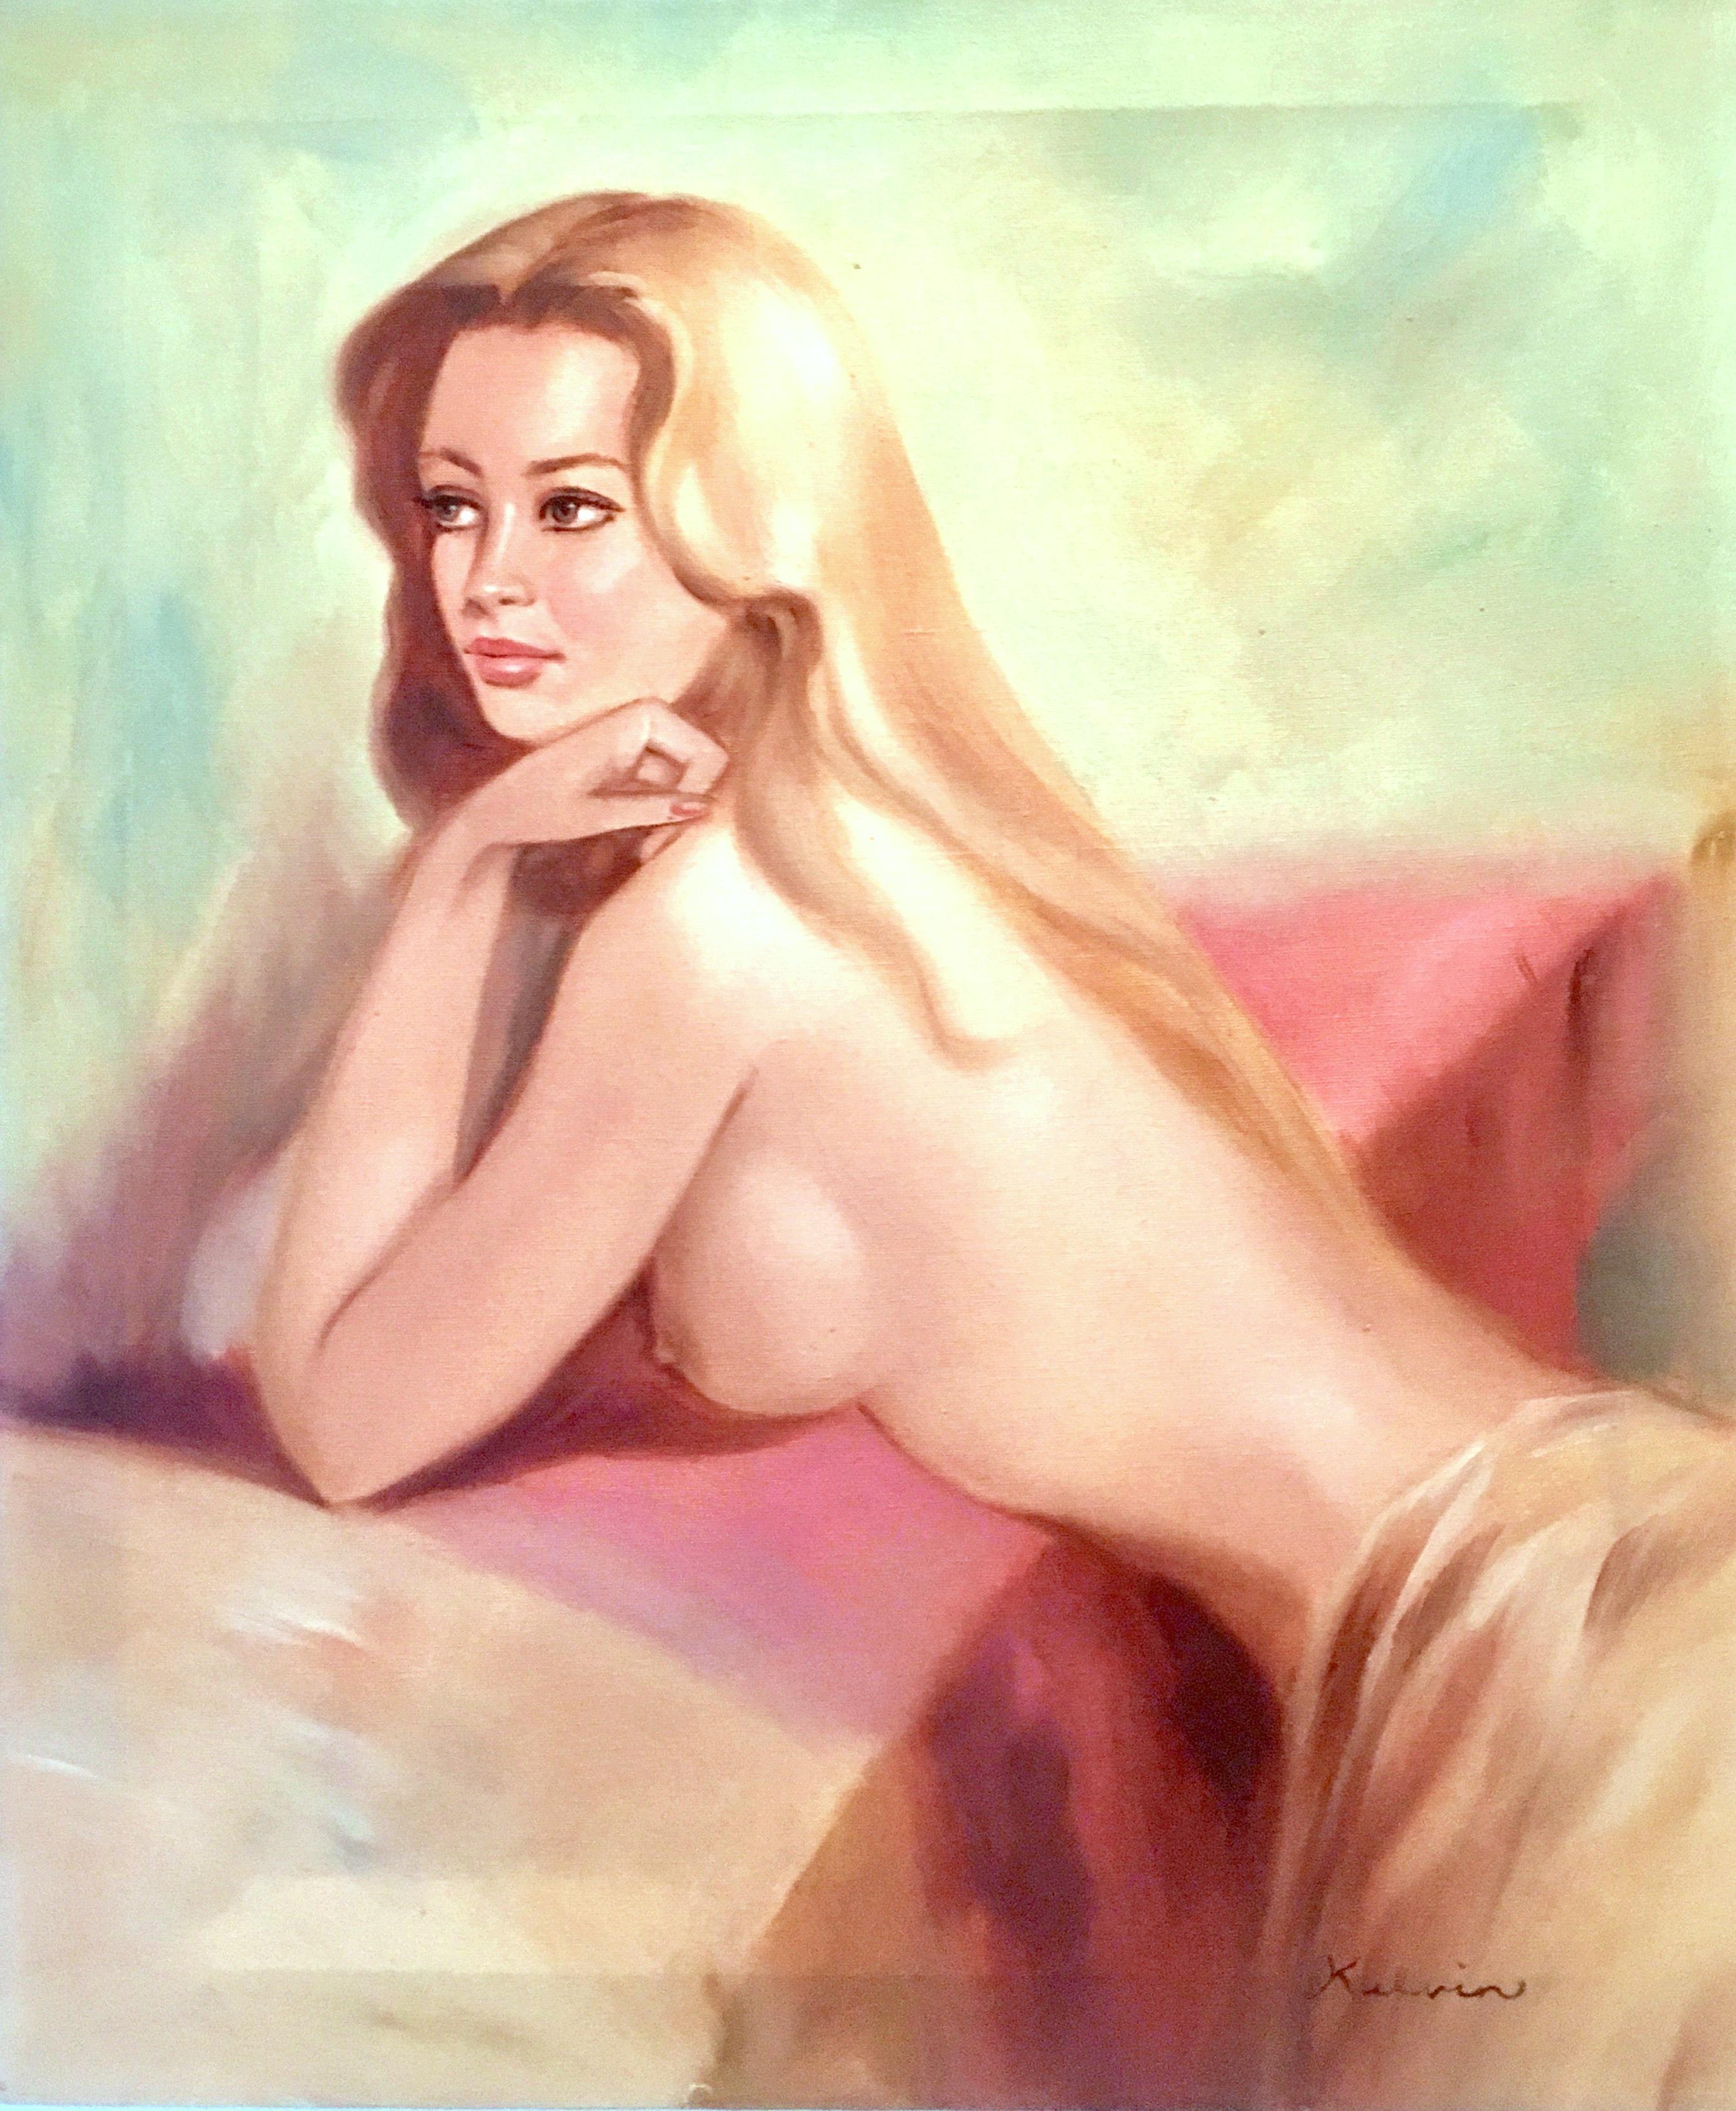 20th Century Original oil on stretched canvas painting of a blonde female nude female.
Artist signed lower right, Kelvin.